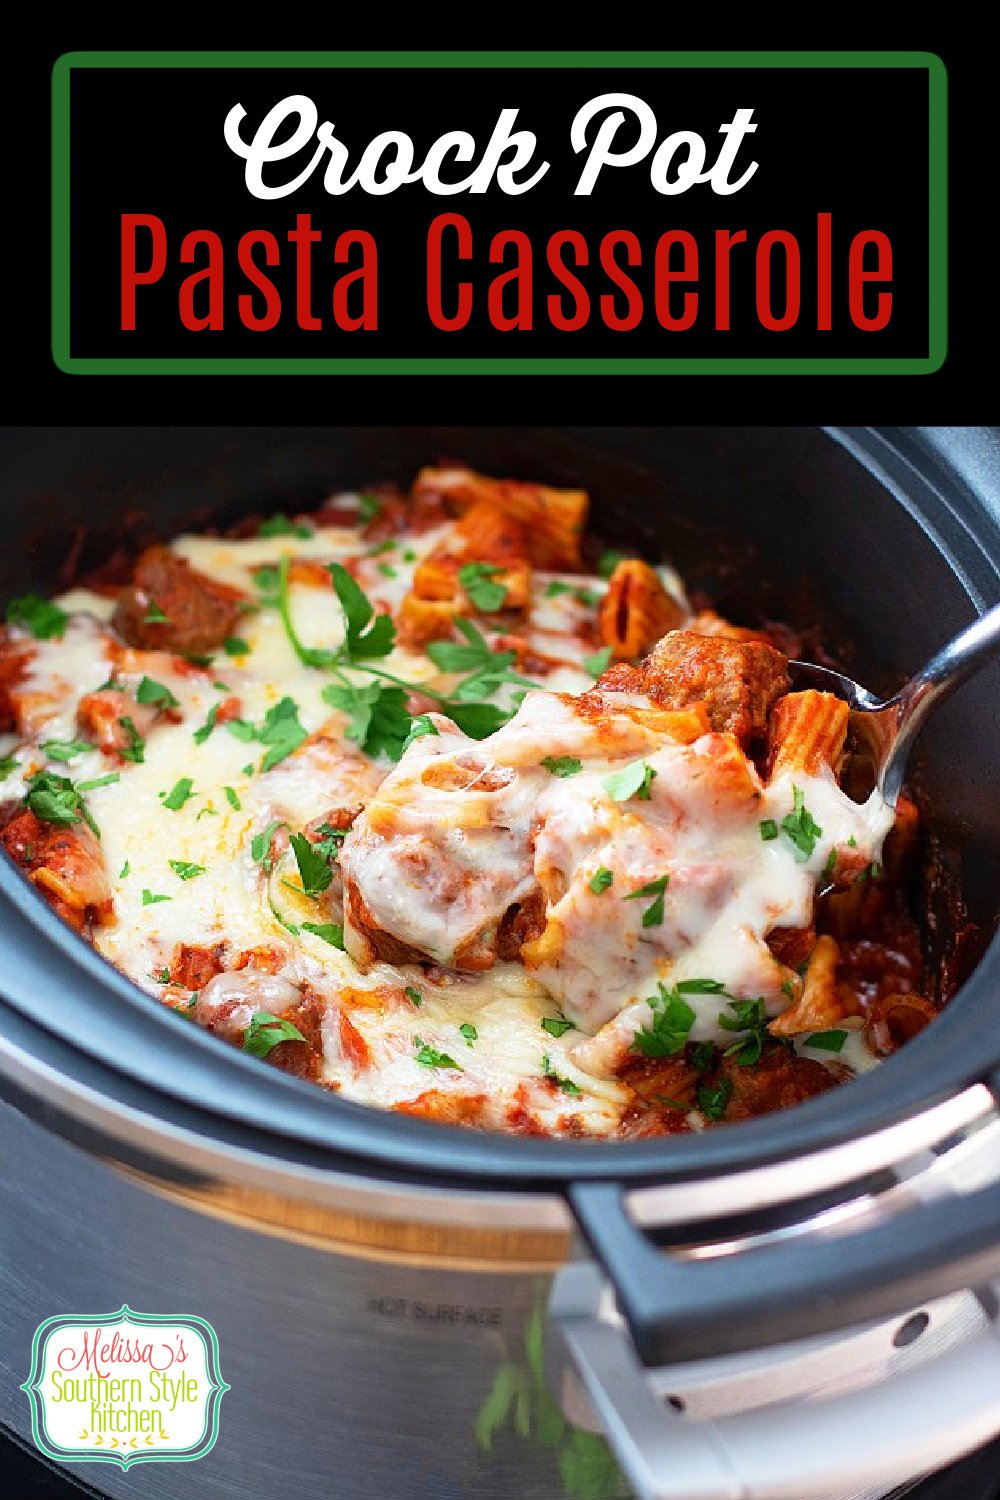 Simmer the sauce for this Crock Pot Pasta Casserole low and slow then add pasta for an Italian inspired family pleasing dinner #crockpotpastacasserole #crockpotrecipes #slowcookerpasta #pastasauce #slowcookedrigatoni #easypastarecipes #Italianrecipes #pastacasserole via @melissasssk